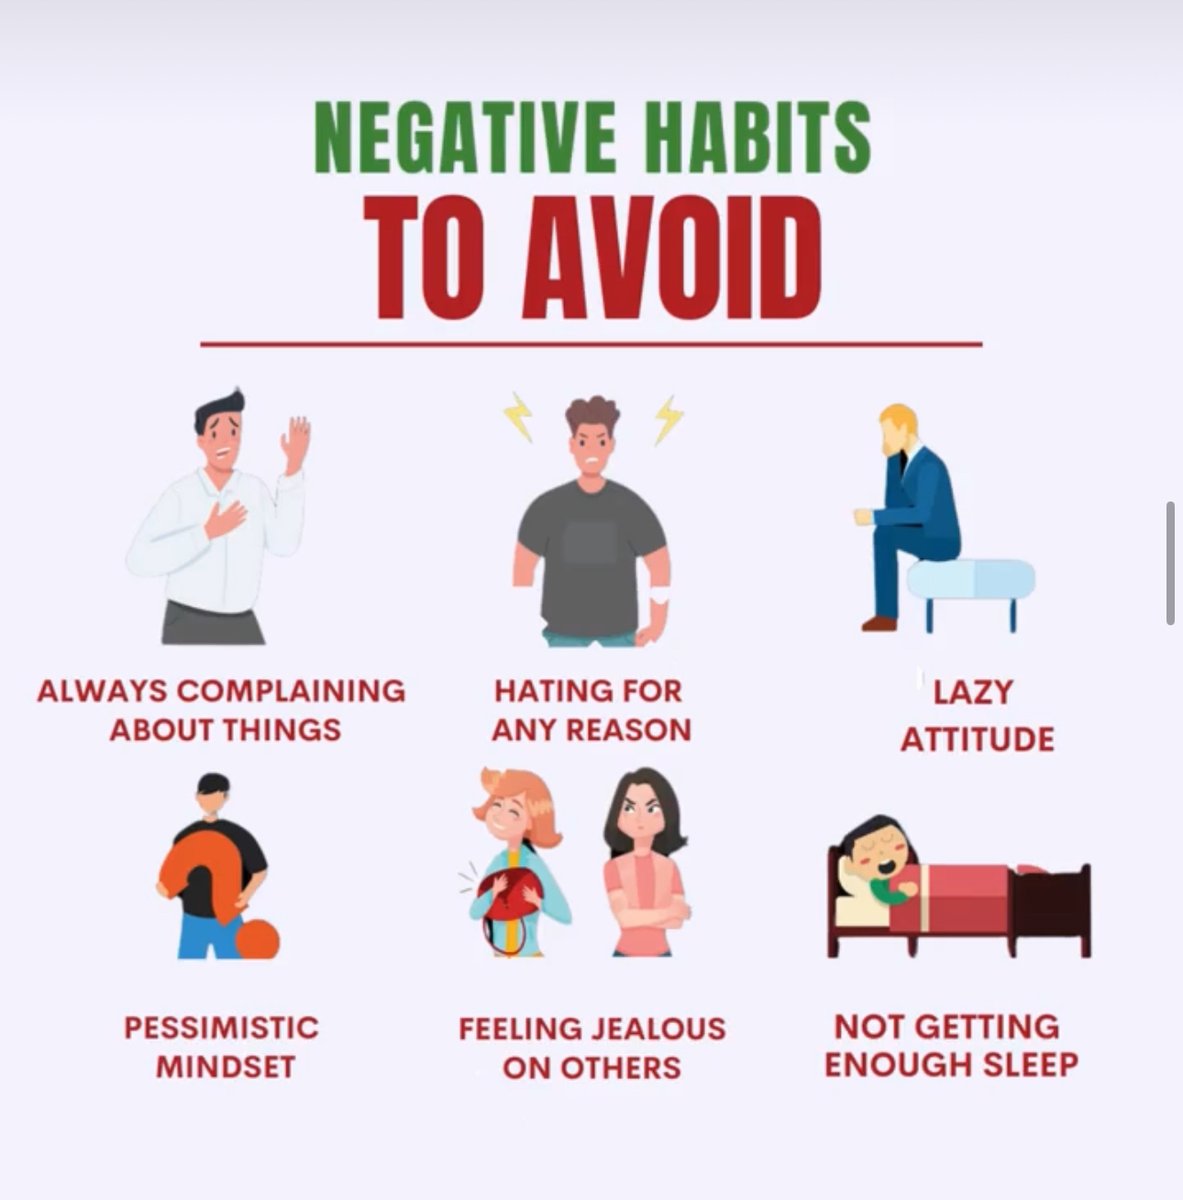 Dealing with negativity can be draining, but what if we use it to fuel our growth?

#Positivity #OvercomeNegativity #SuccessMindset #EmbraceChallenges #PersonalGrowth #Motivational #Inspirational #LifeHacks #MentalStrength #Resilience #PowerOfPositivity